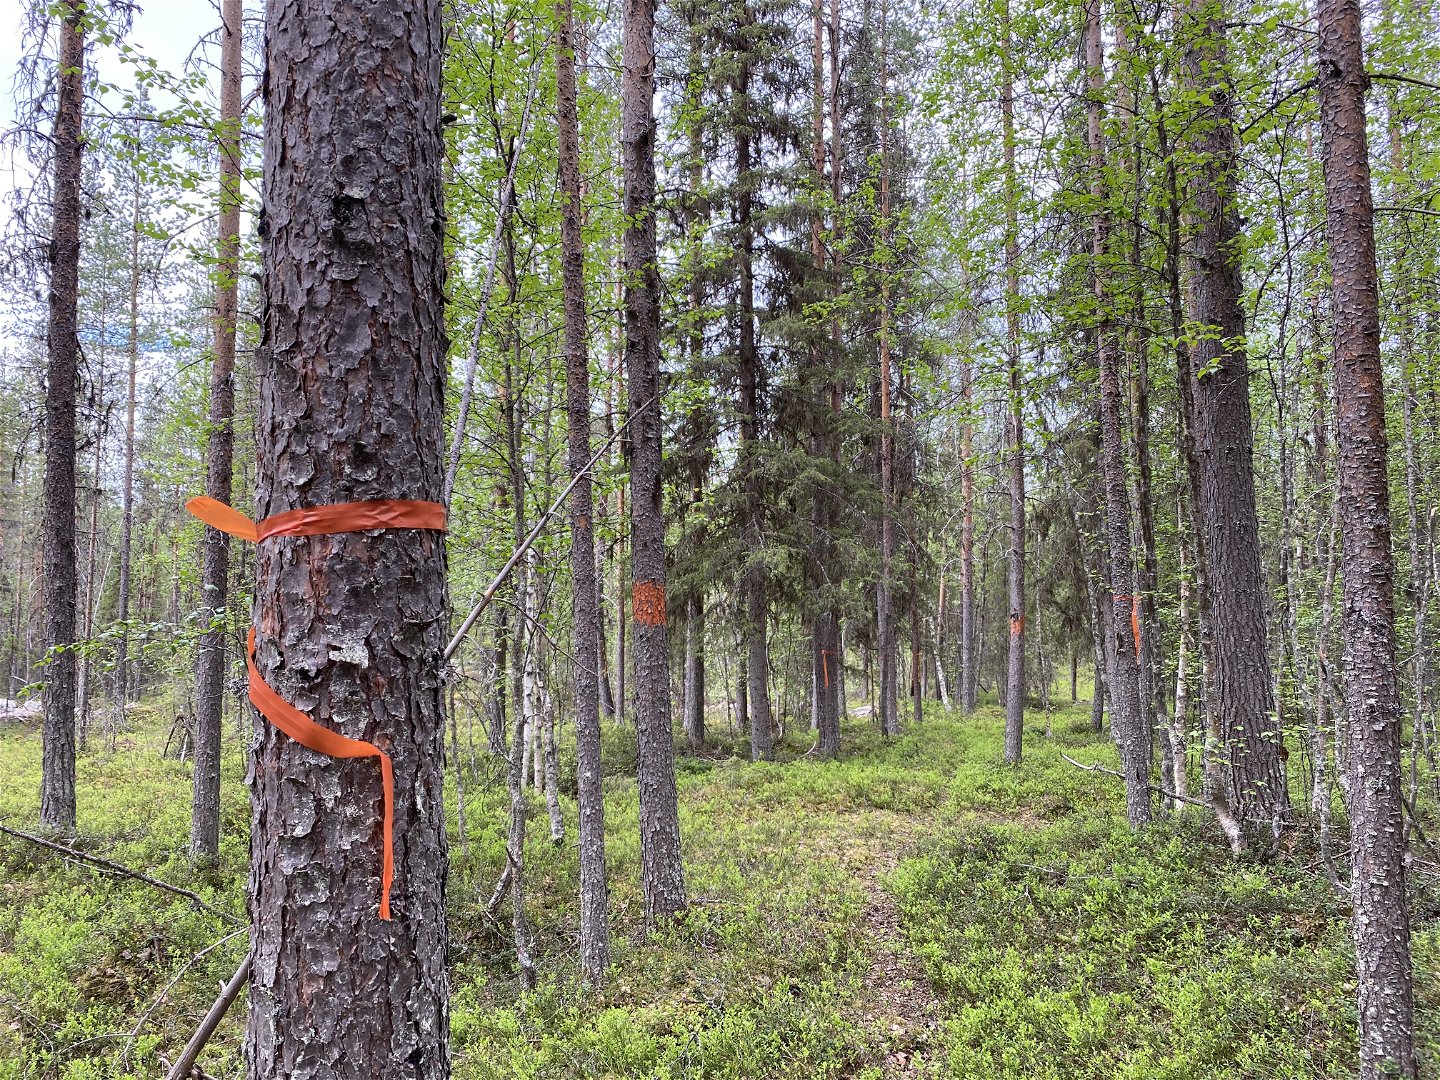 Orange color/marks on the trees showing where the trail is